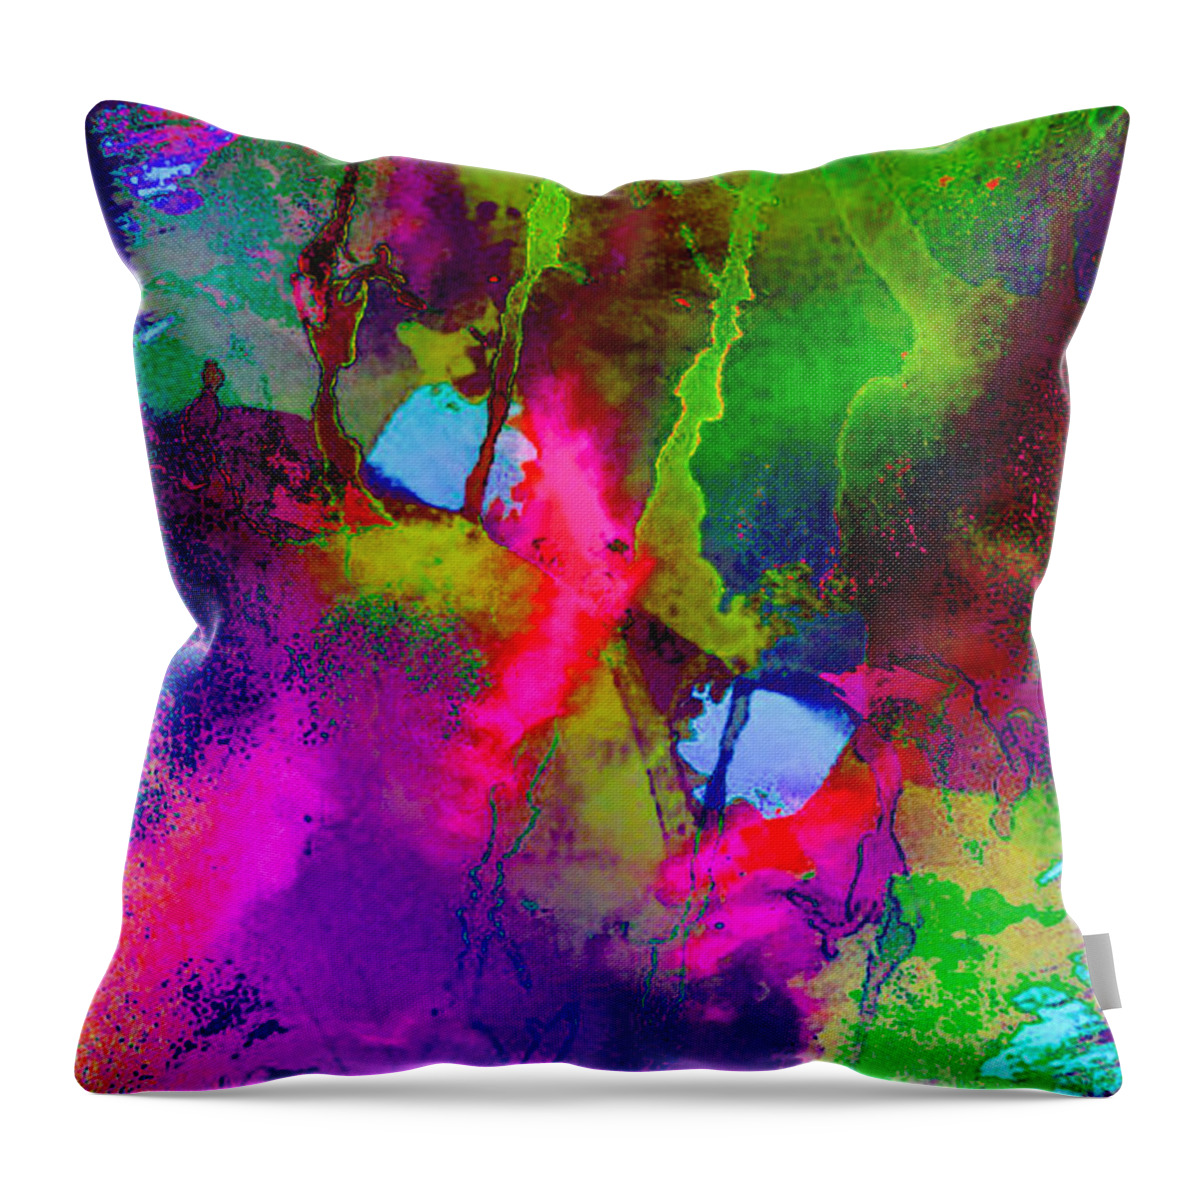 Lake Throw Pillow featuring the digital art Abstract Pink Clouds Overhead by Russel Considine